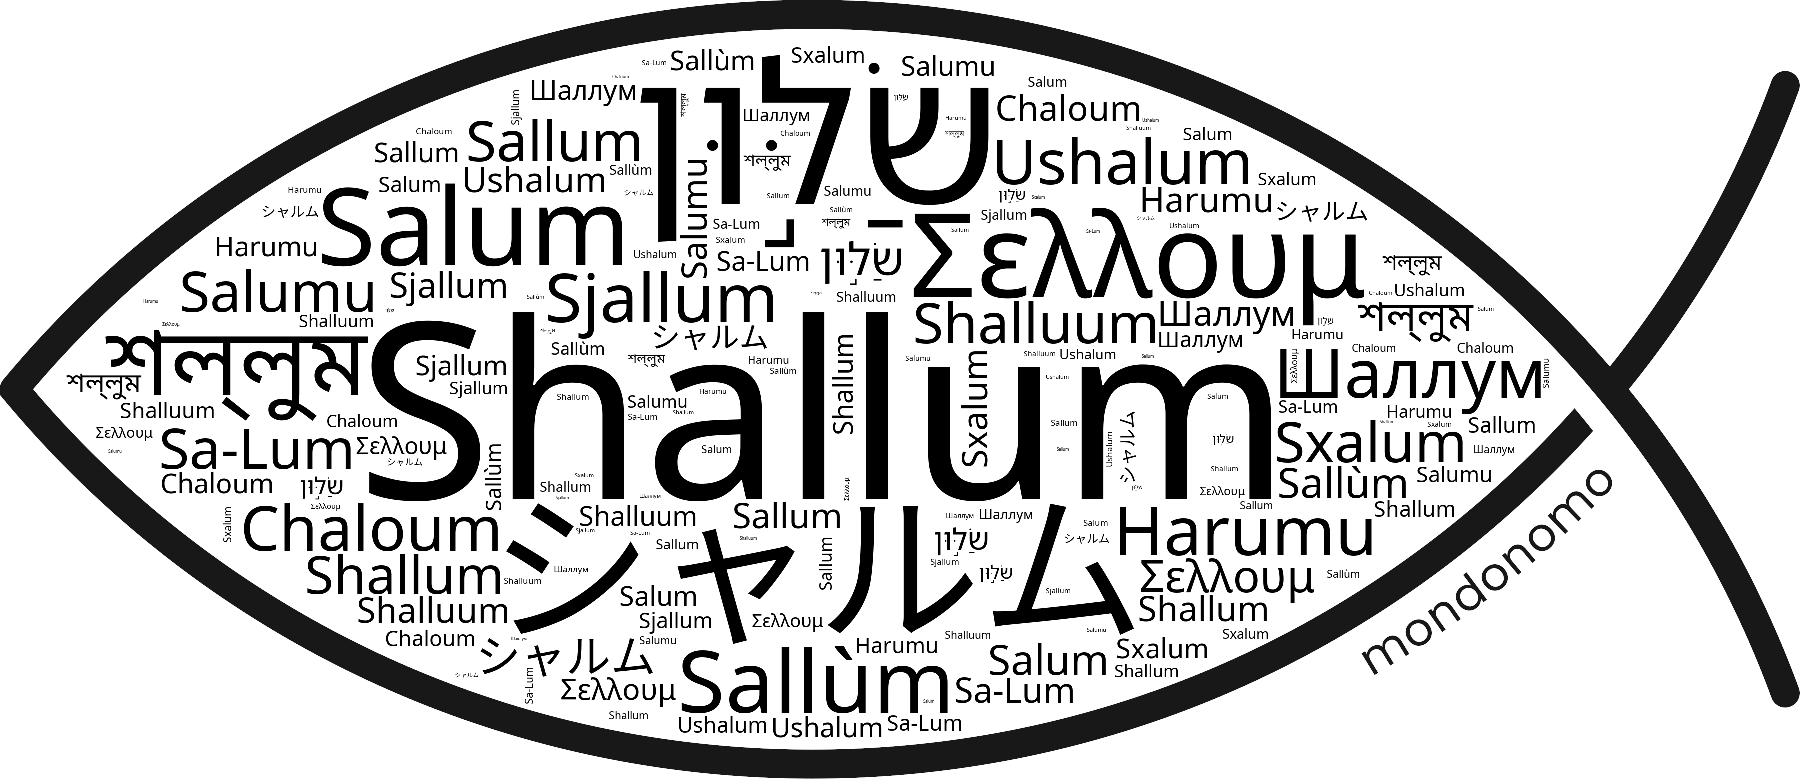 Name Shallum in the world's Bibles